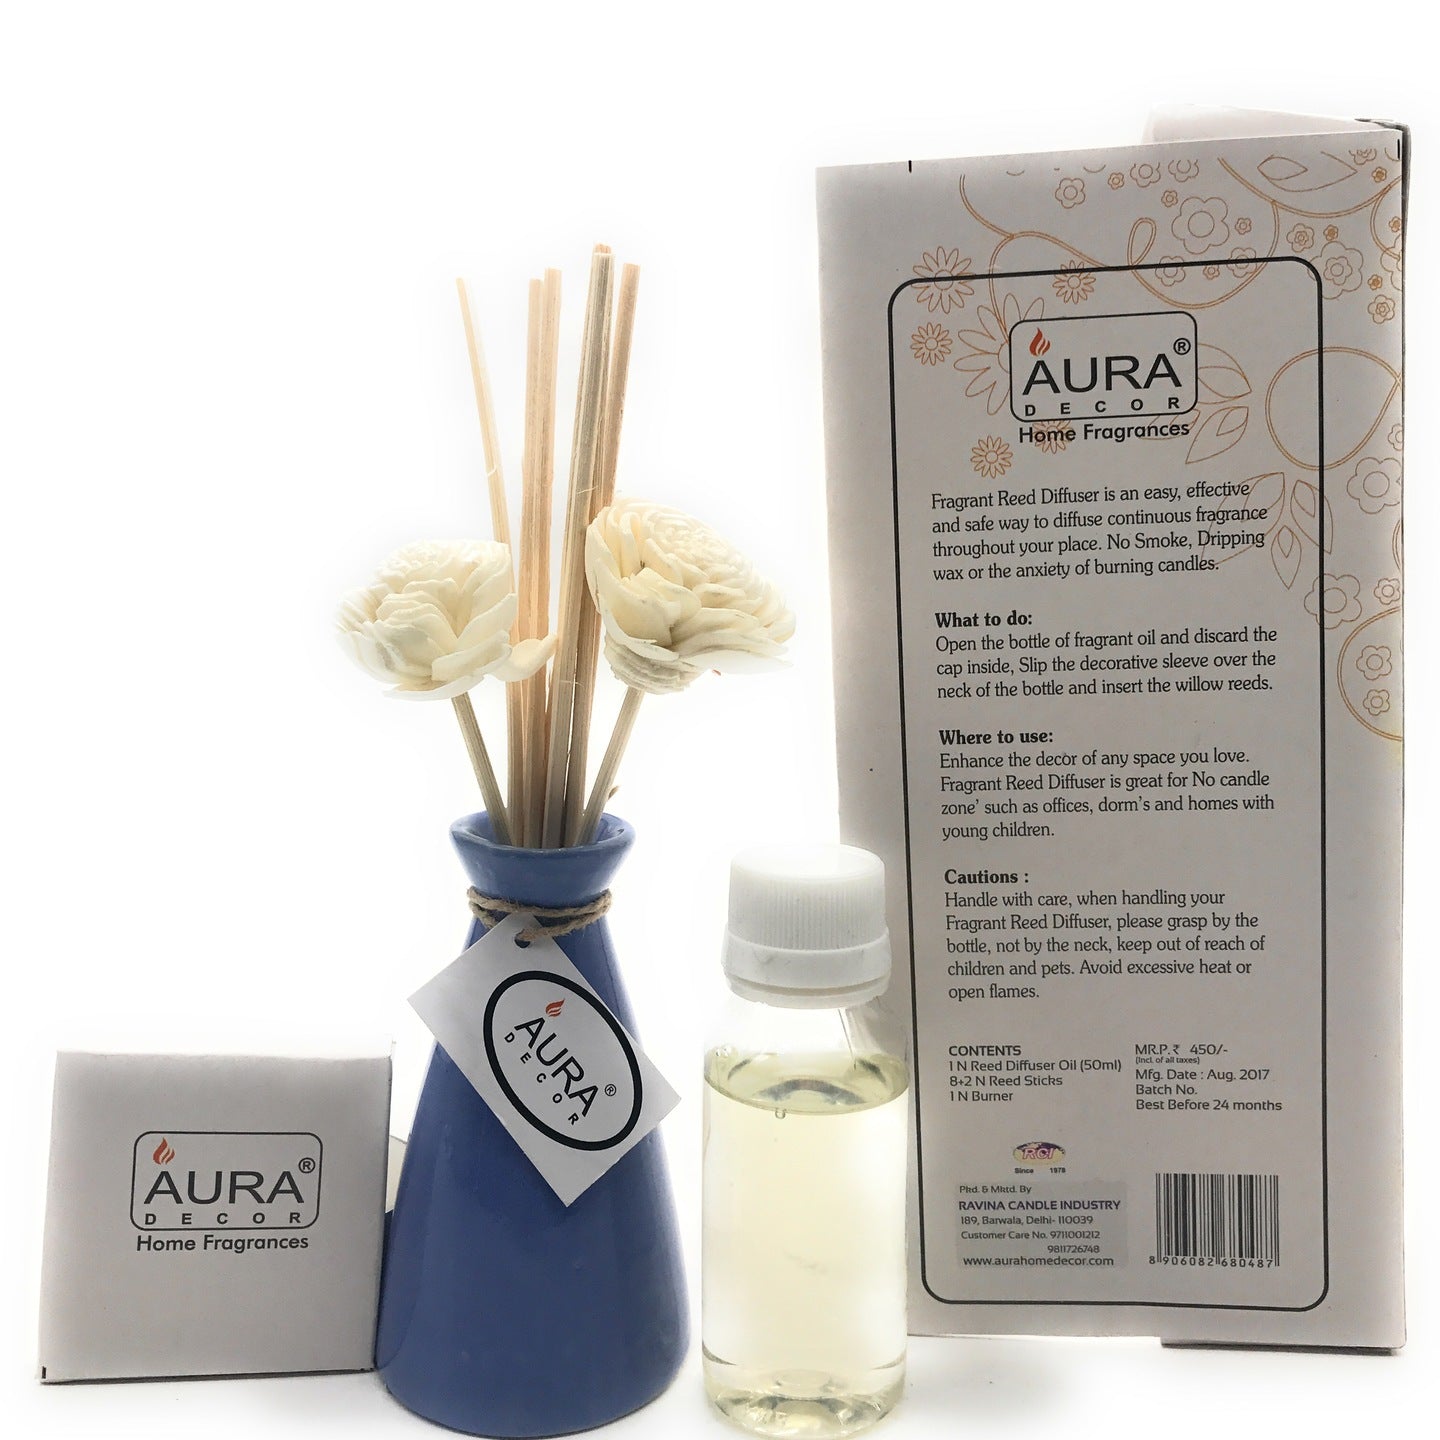 Reed Diffuser Gift Set ( Lavender ) - auradecor.co.in